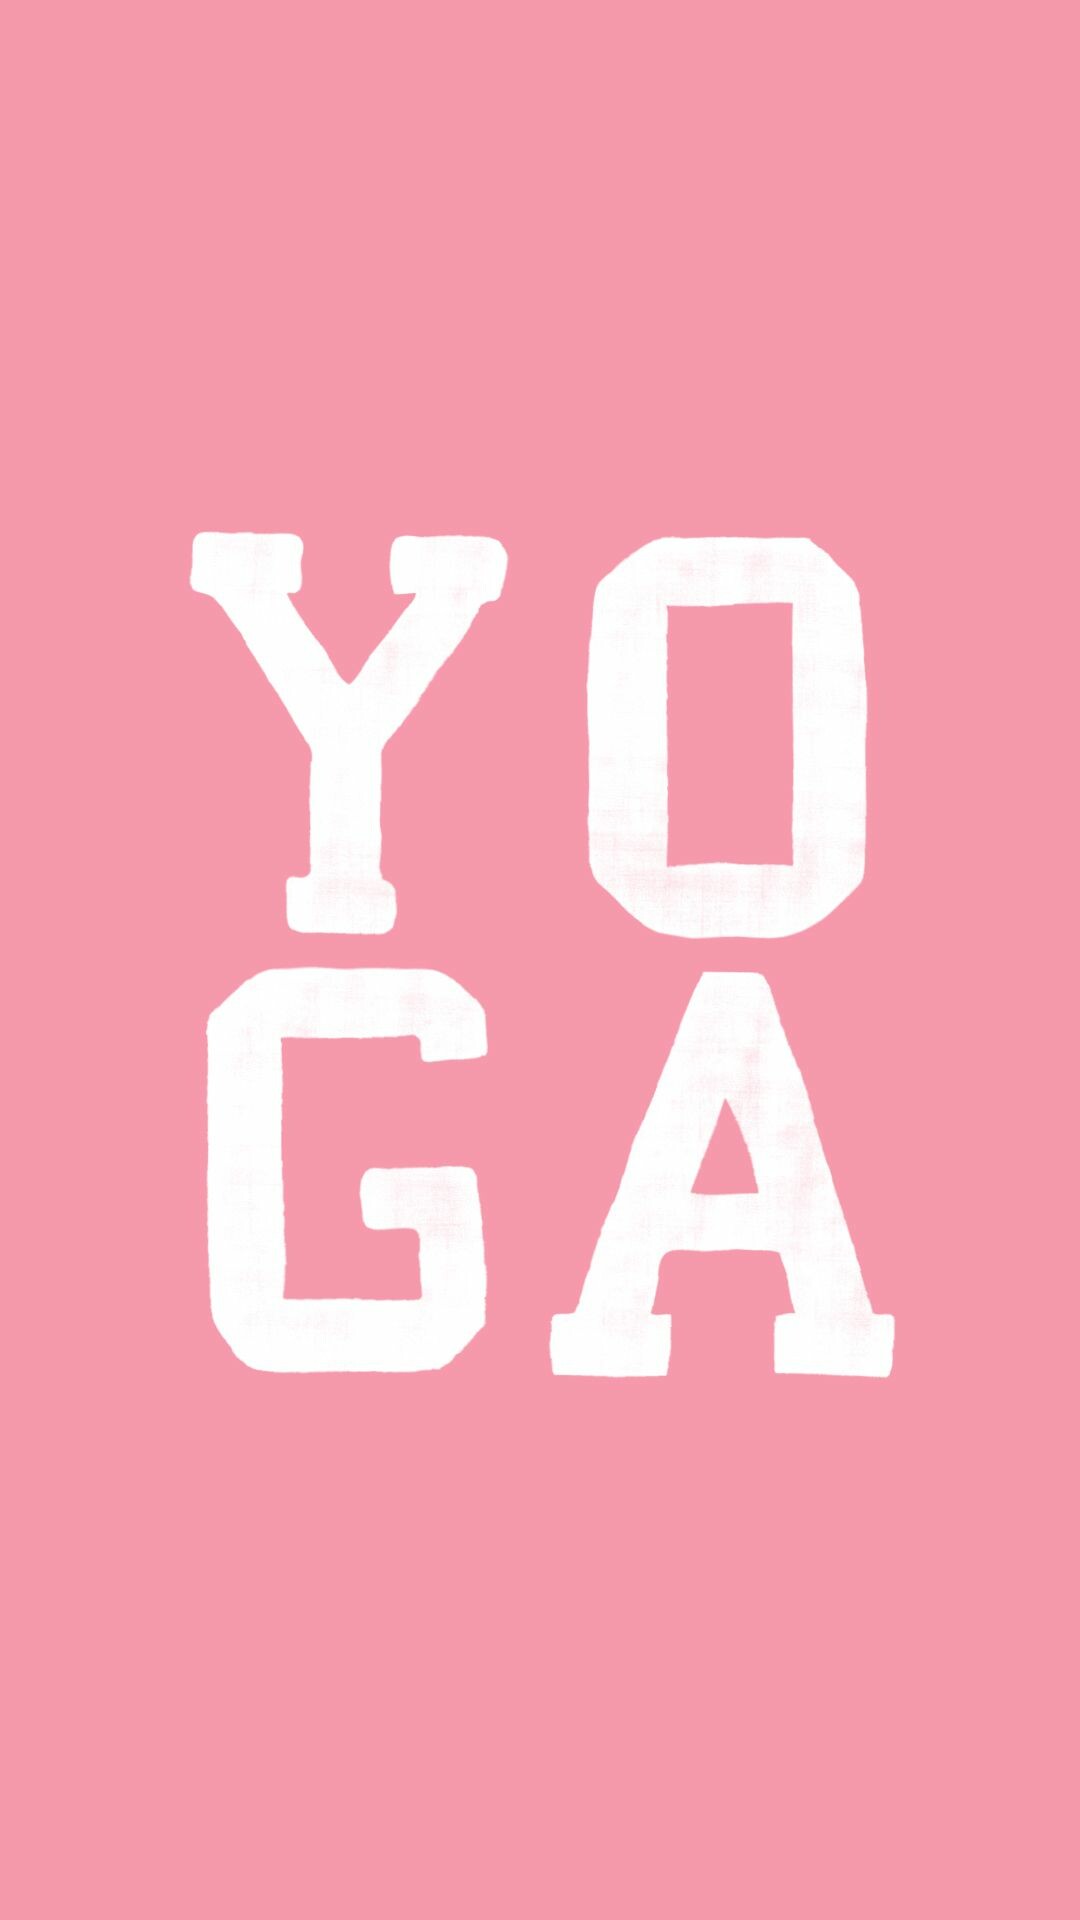 Yoga: A  physical and mental practice that involves the body, mind and spirit. 1080x1920 Full HD Wallpaper.